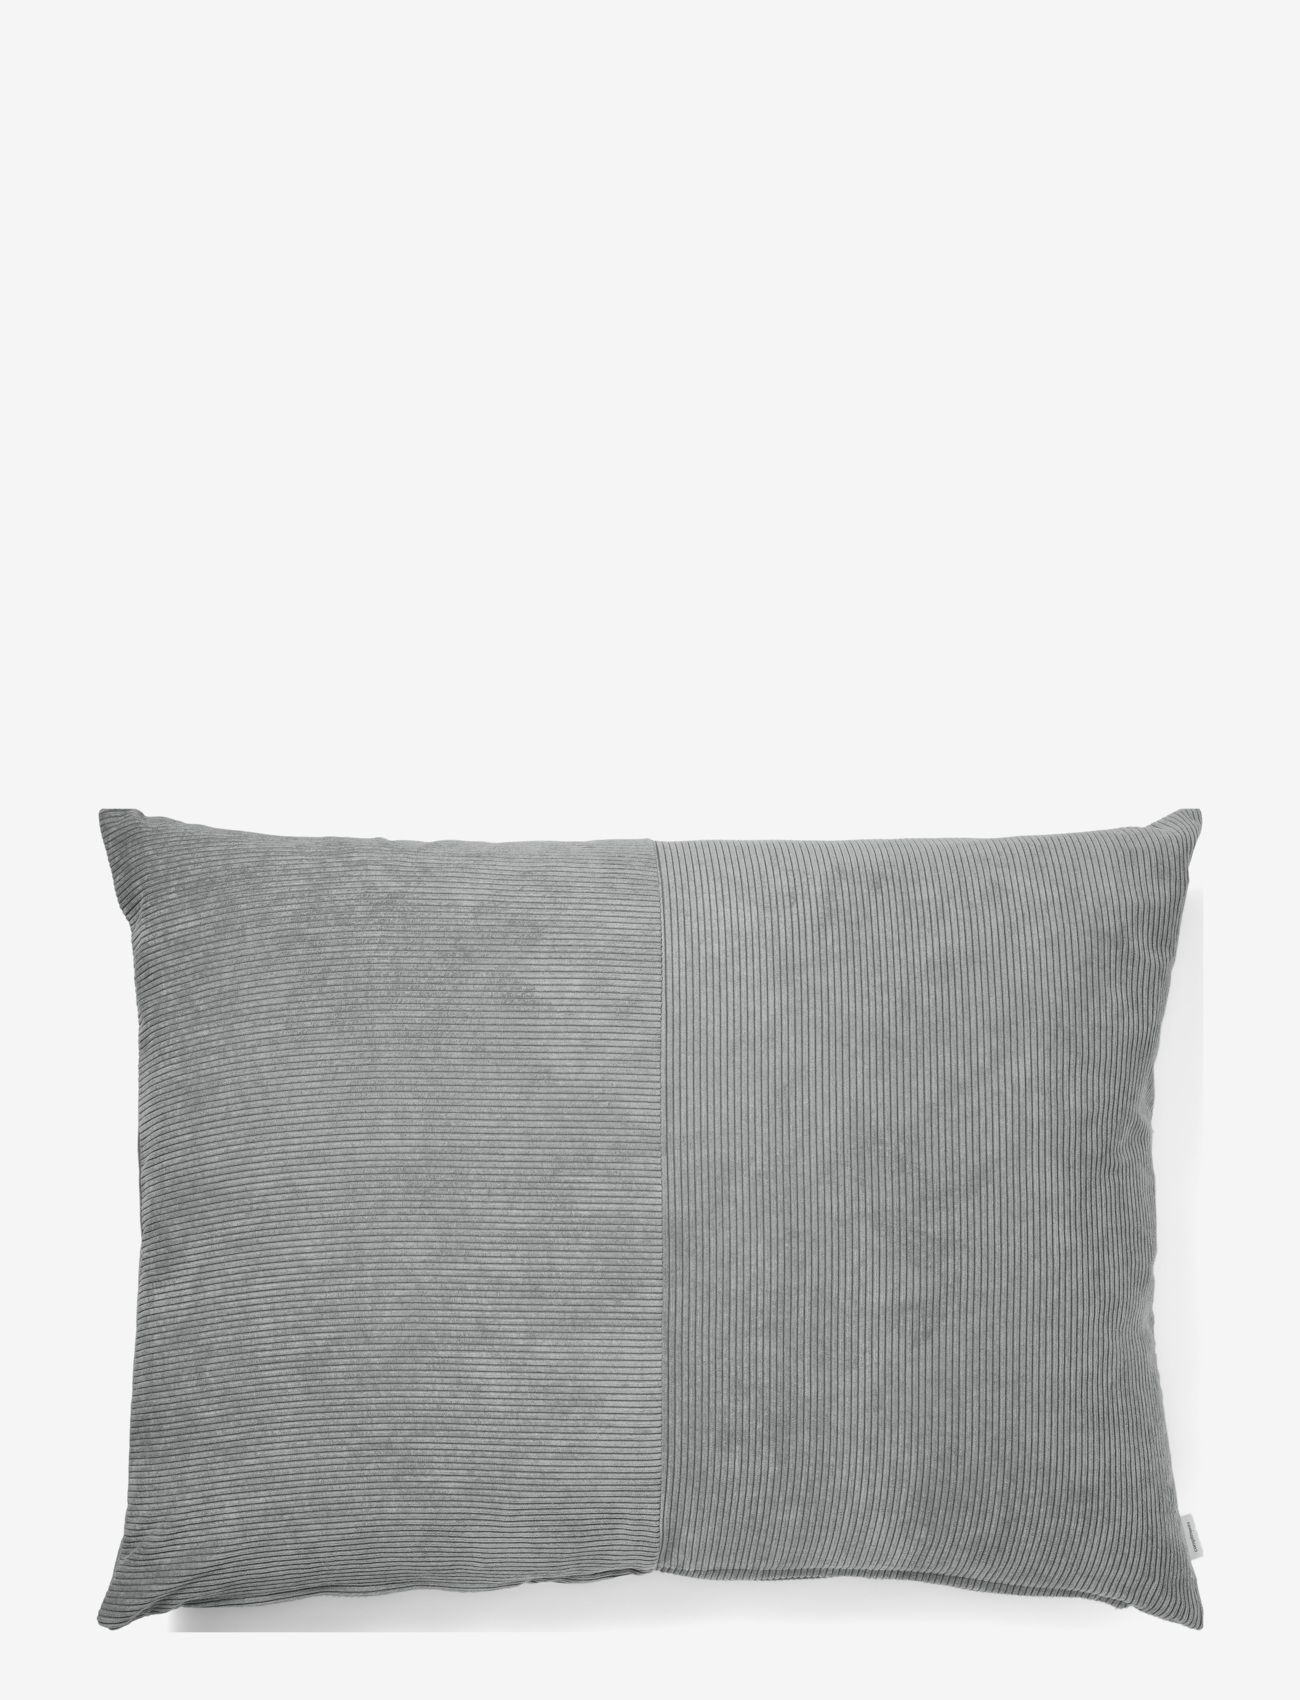 compliments - Wille 60x80 cm - cushions - light grey - 0